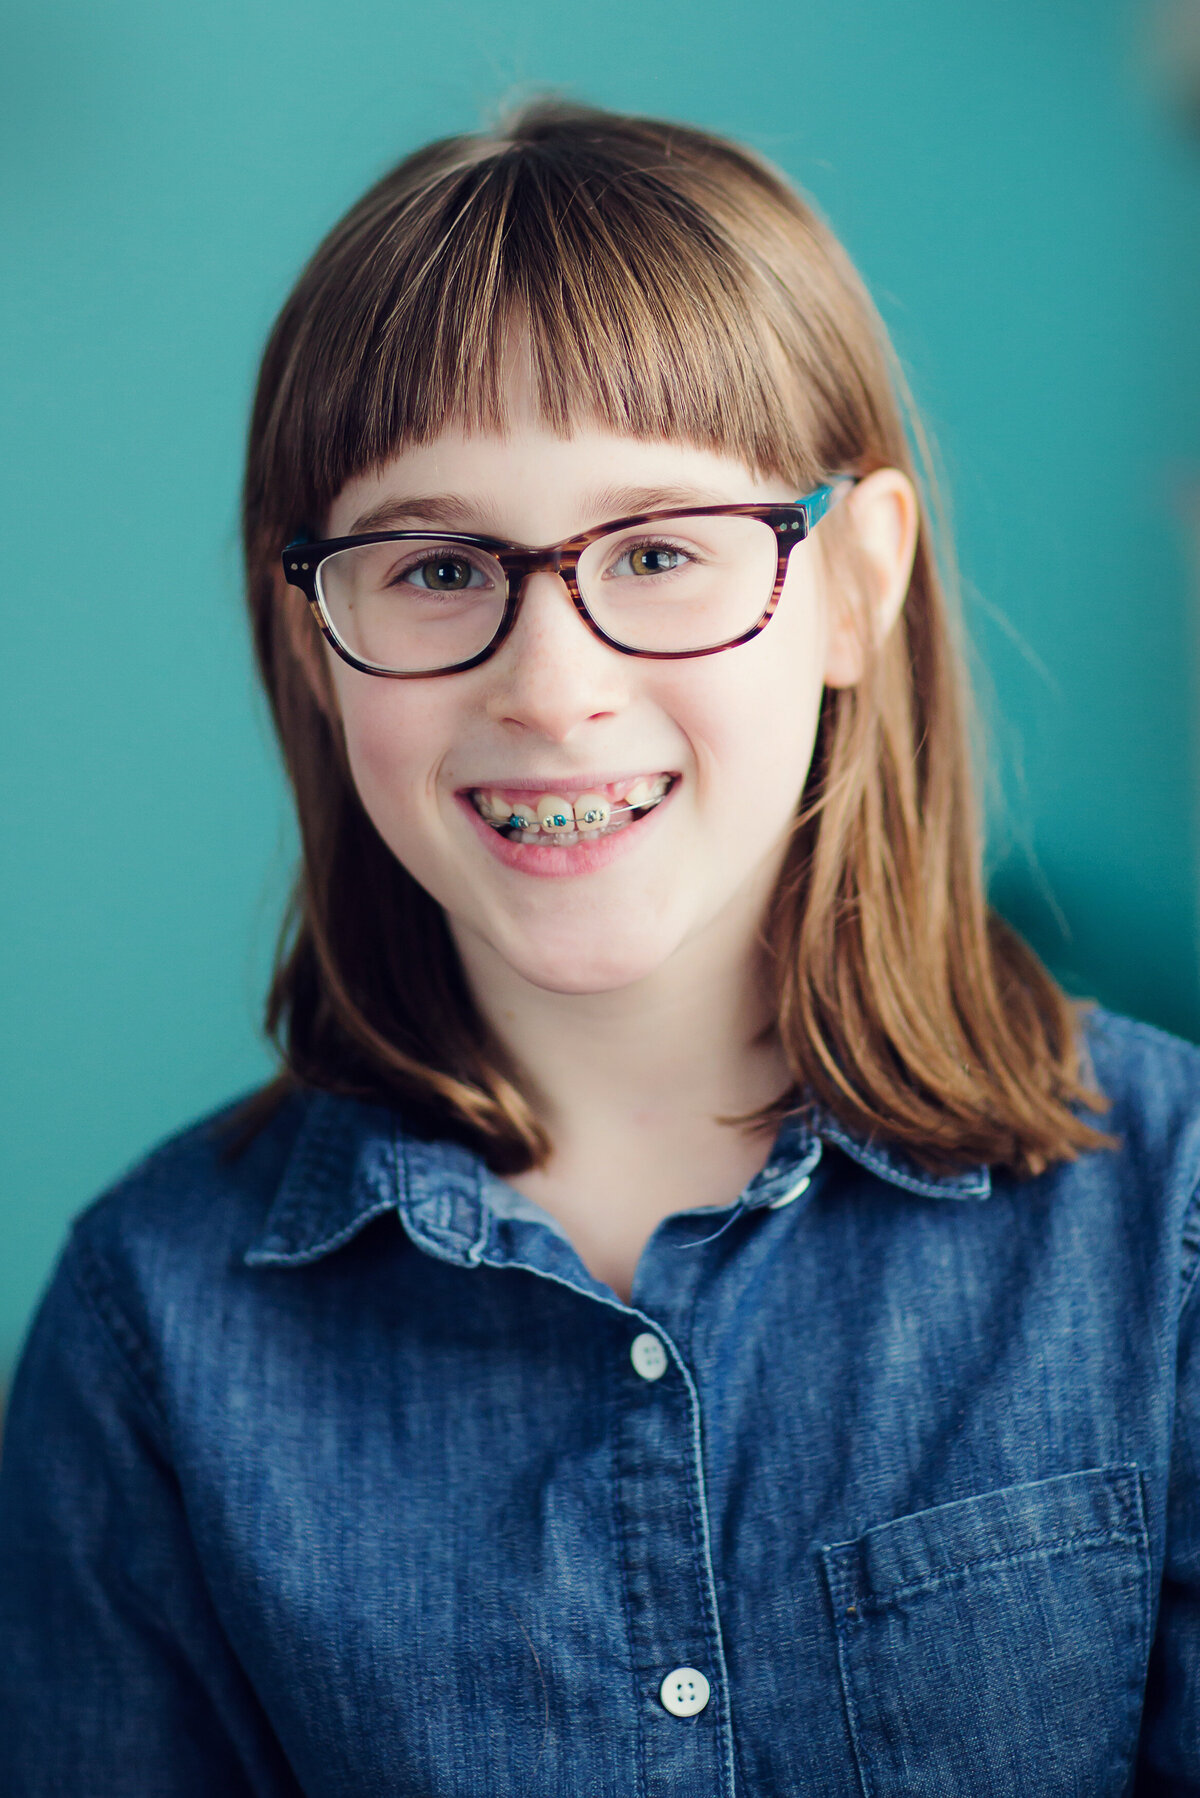 Portrait of girl smiling at the camera with glasses, braces, and a denim shirt.